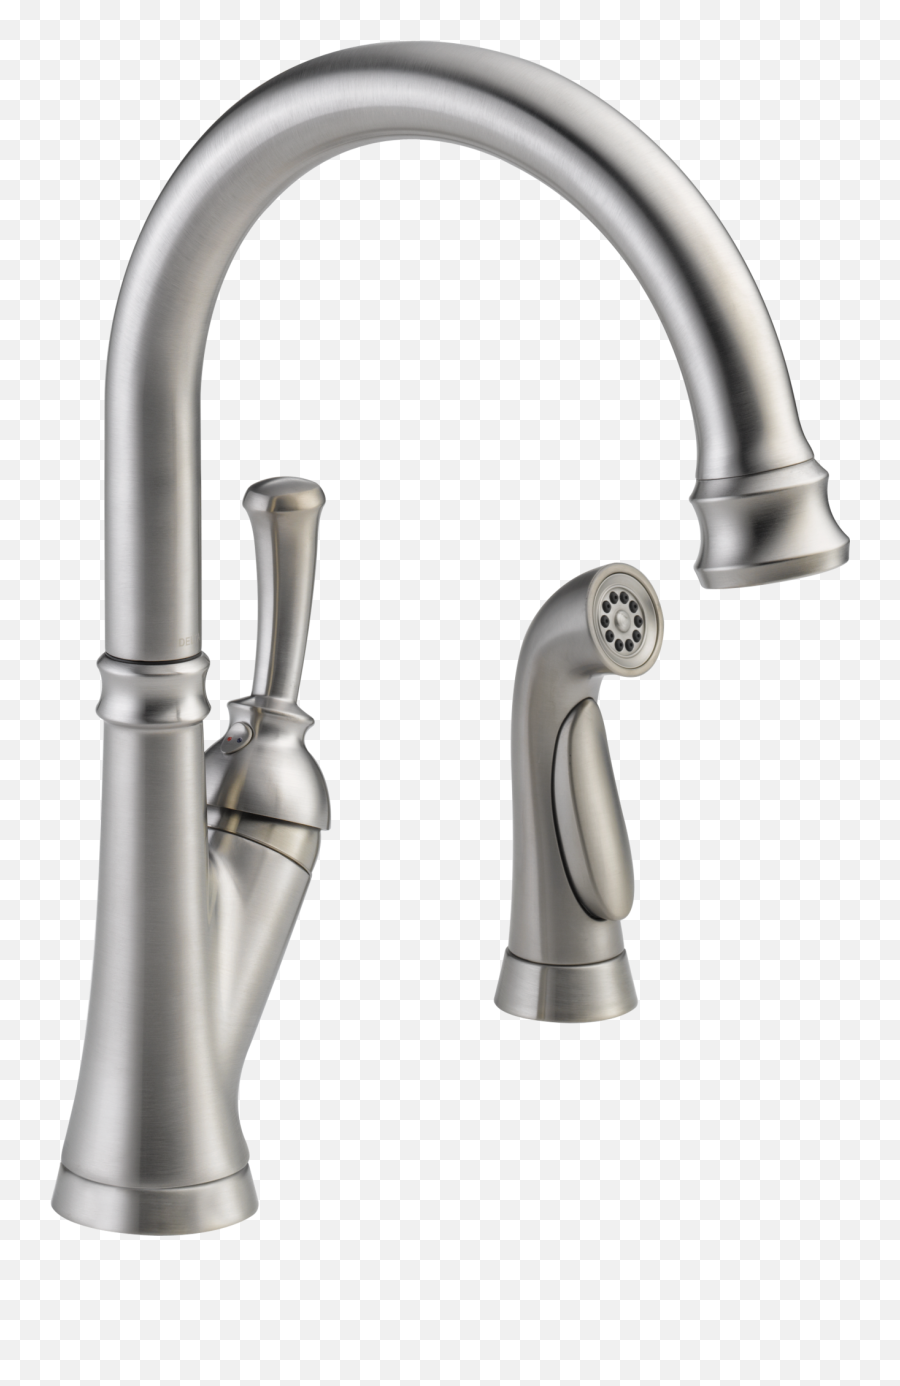 Single Handle Kitchen Faucet With Spray - Delta Kitchen Faucet With Side Sprayer Emoji,Guess The Emoji Level 31answers